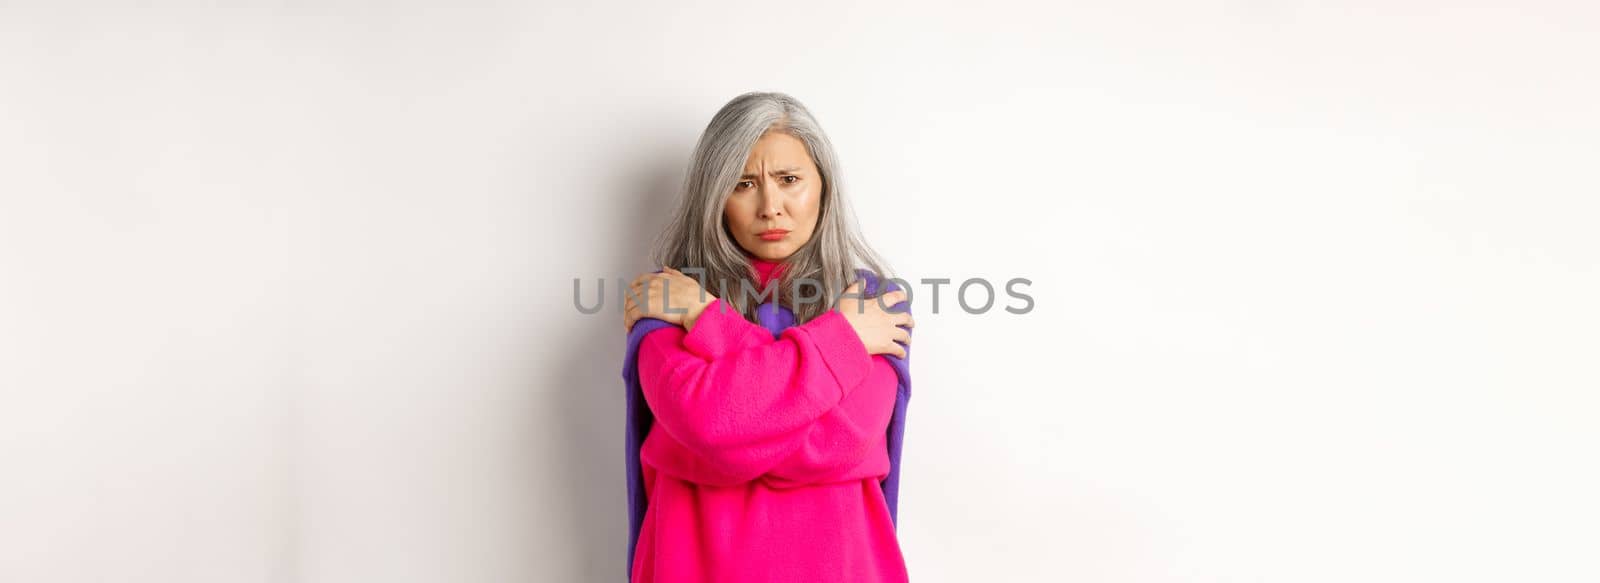 Defensive and offended asian middle-aged woman hugging body, comforting herself and looking angry at camera, frowning insulted, standing over white background.